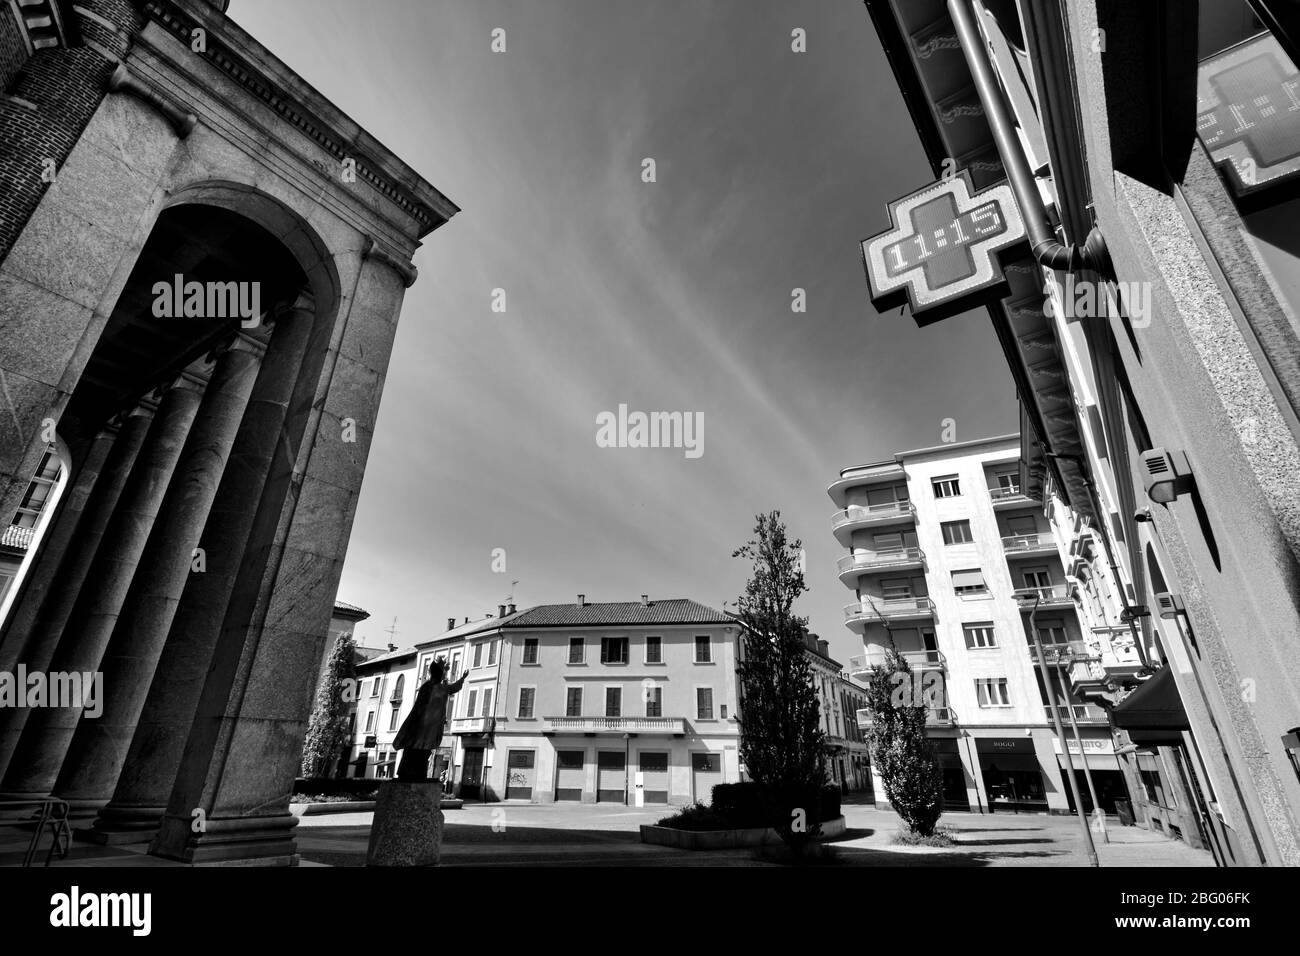 The silence and the desolation in a city near Milan, in sunday morning, during Coronavirus.The main church place is empty no people. Stock Photo